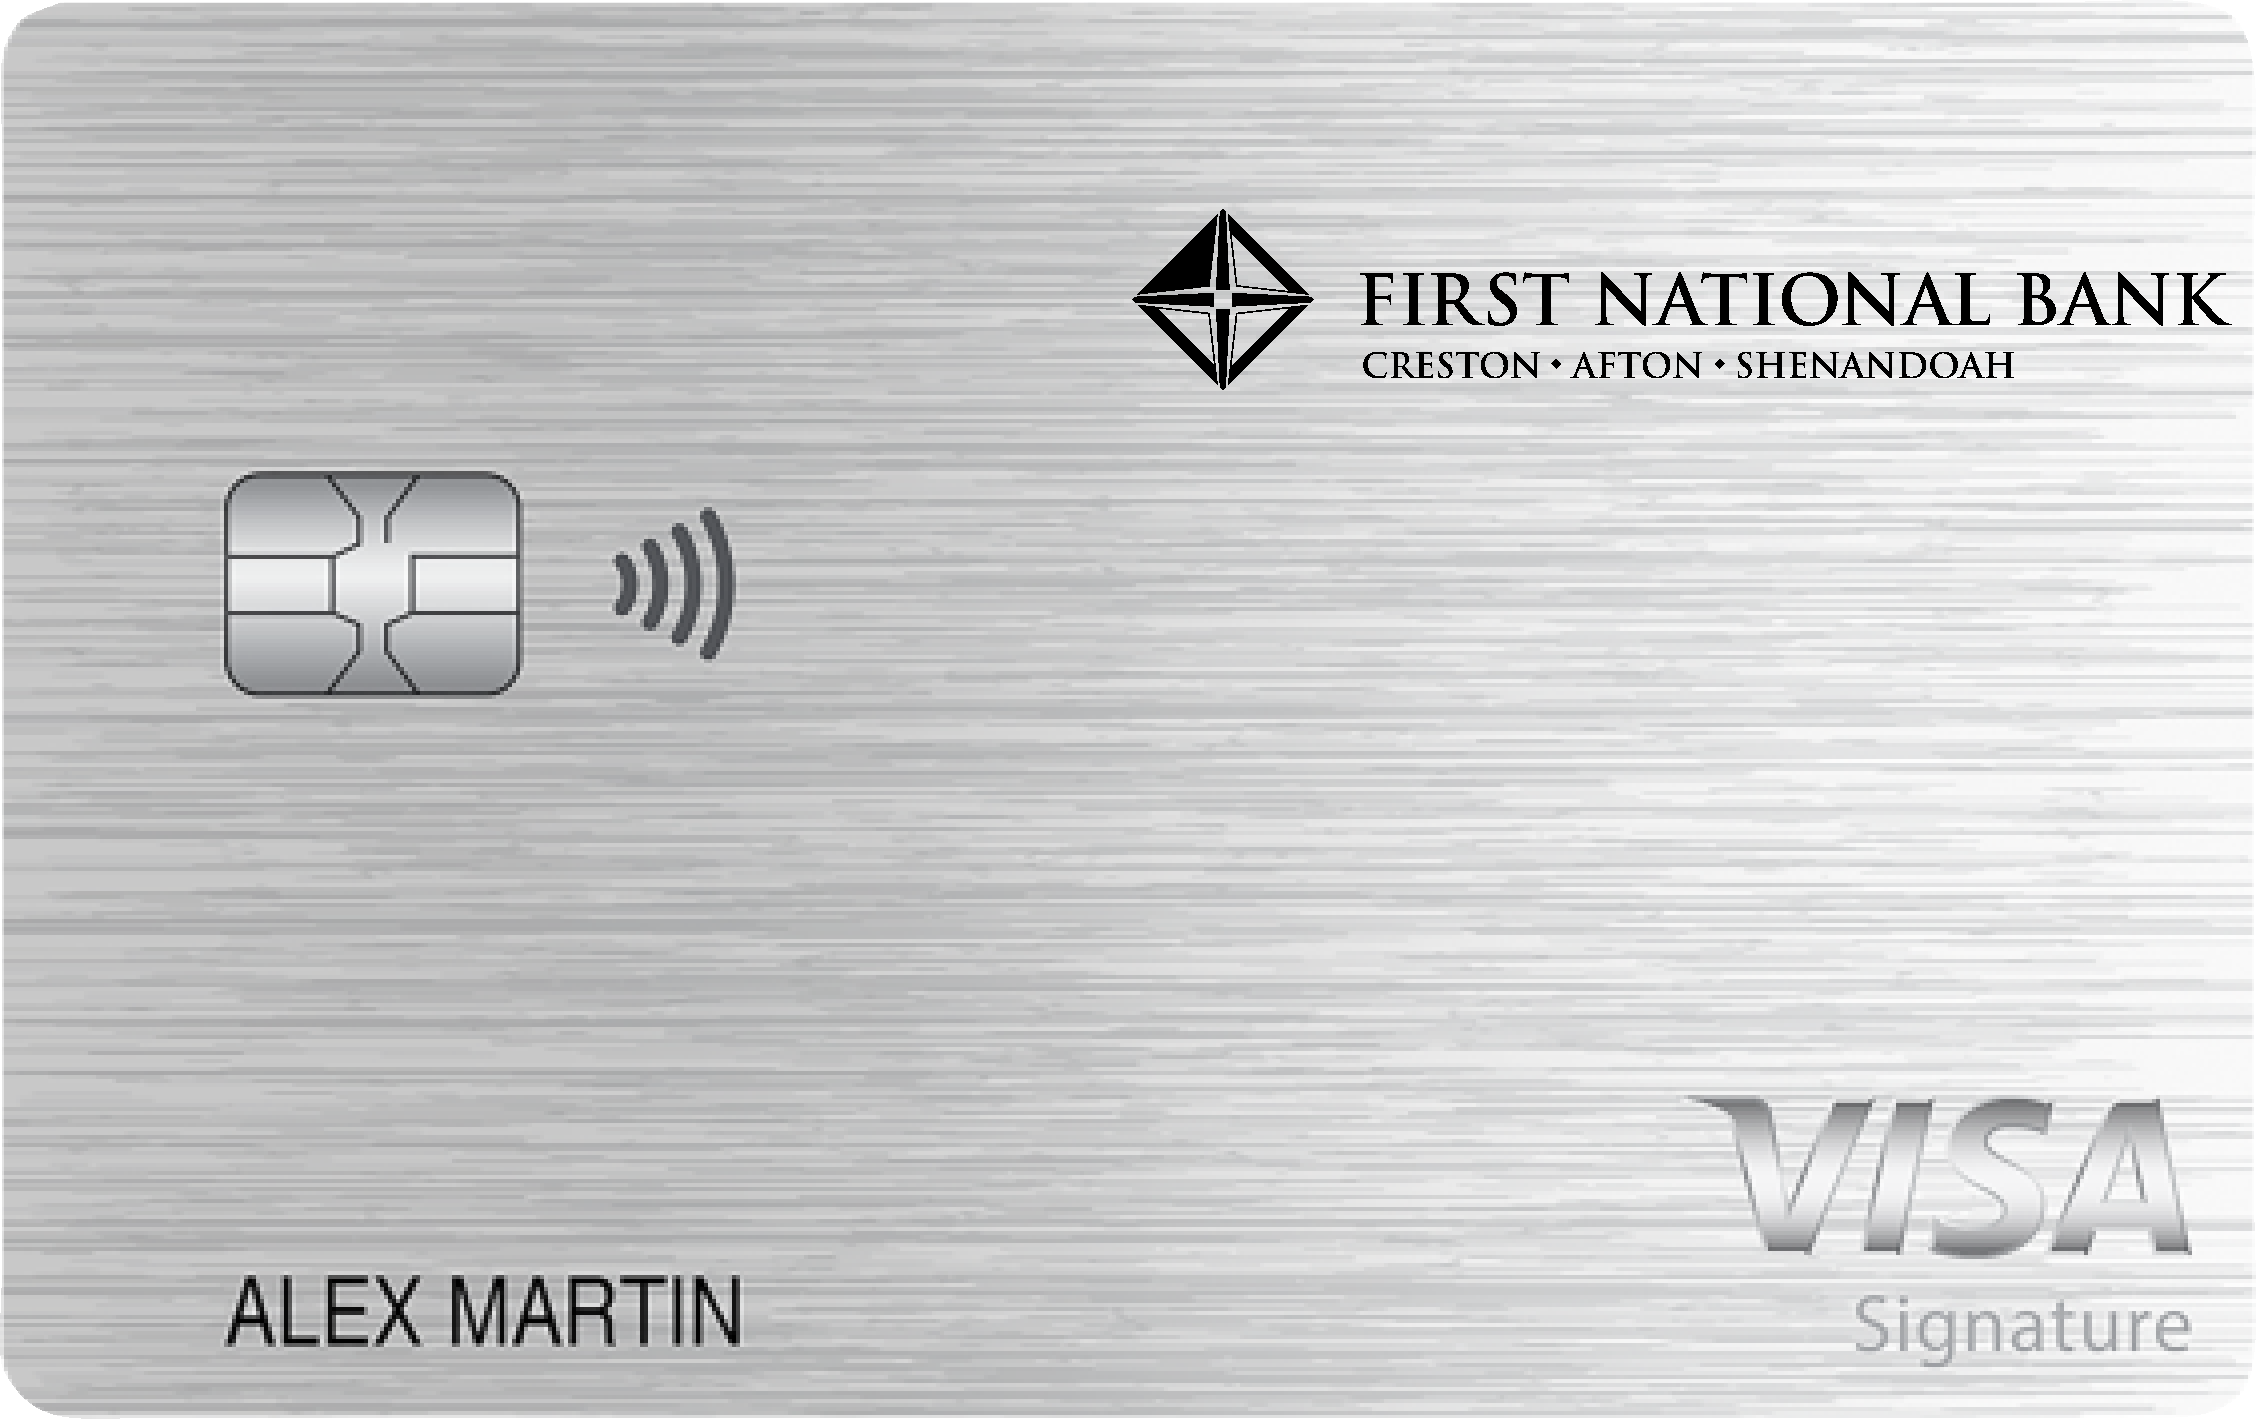 First National Bank in Creston Max Cash Preferred Card